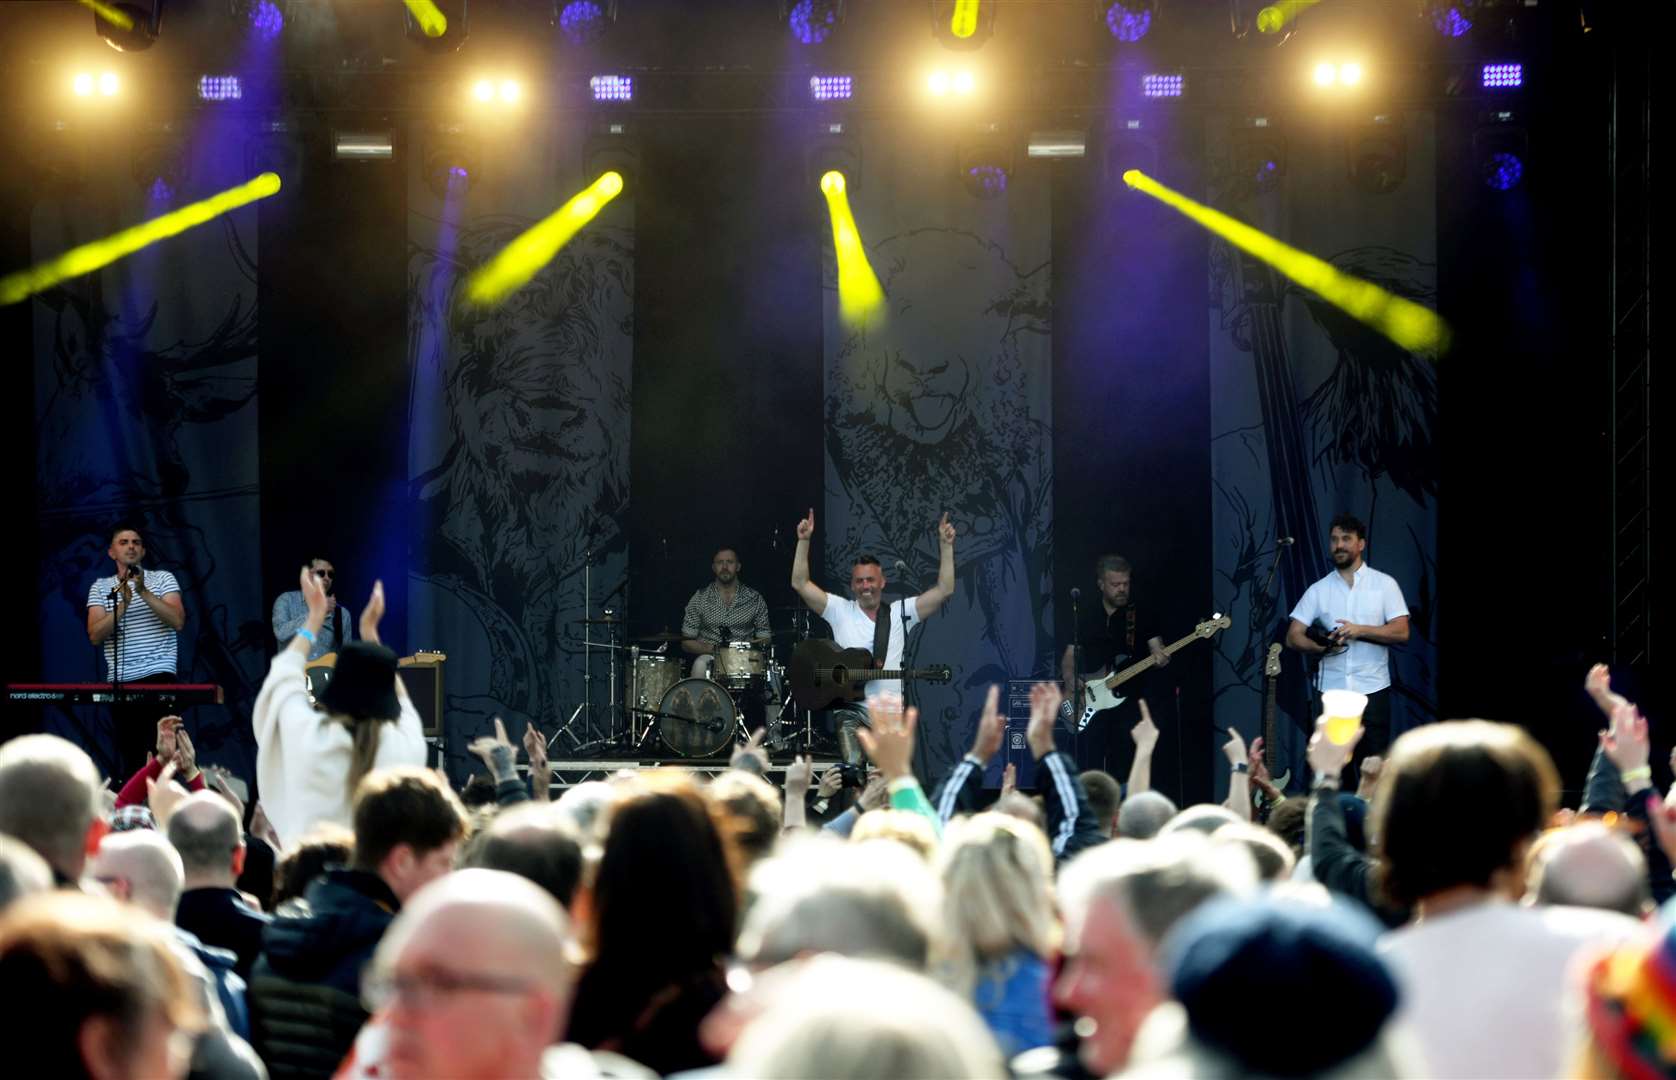 Torridon on stage at The Gathering Festival in Inverness. Picture: James Mackenzie.